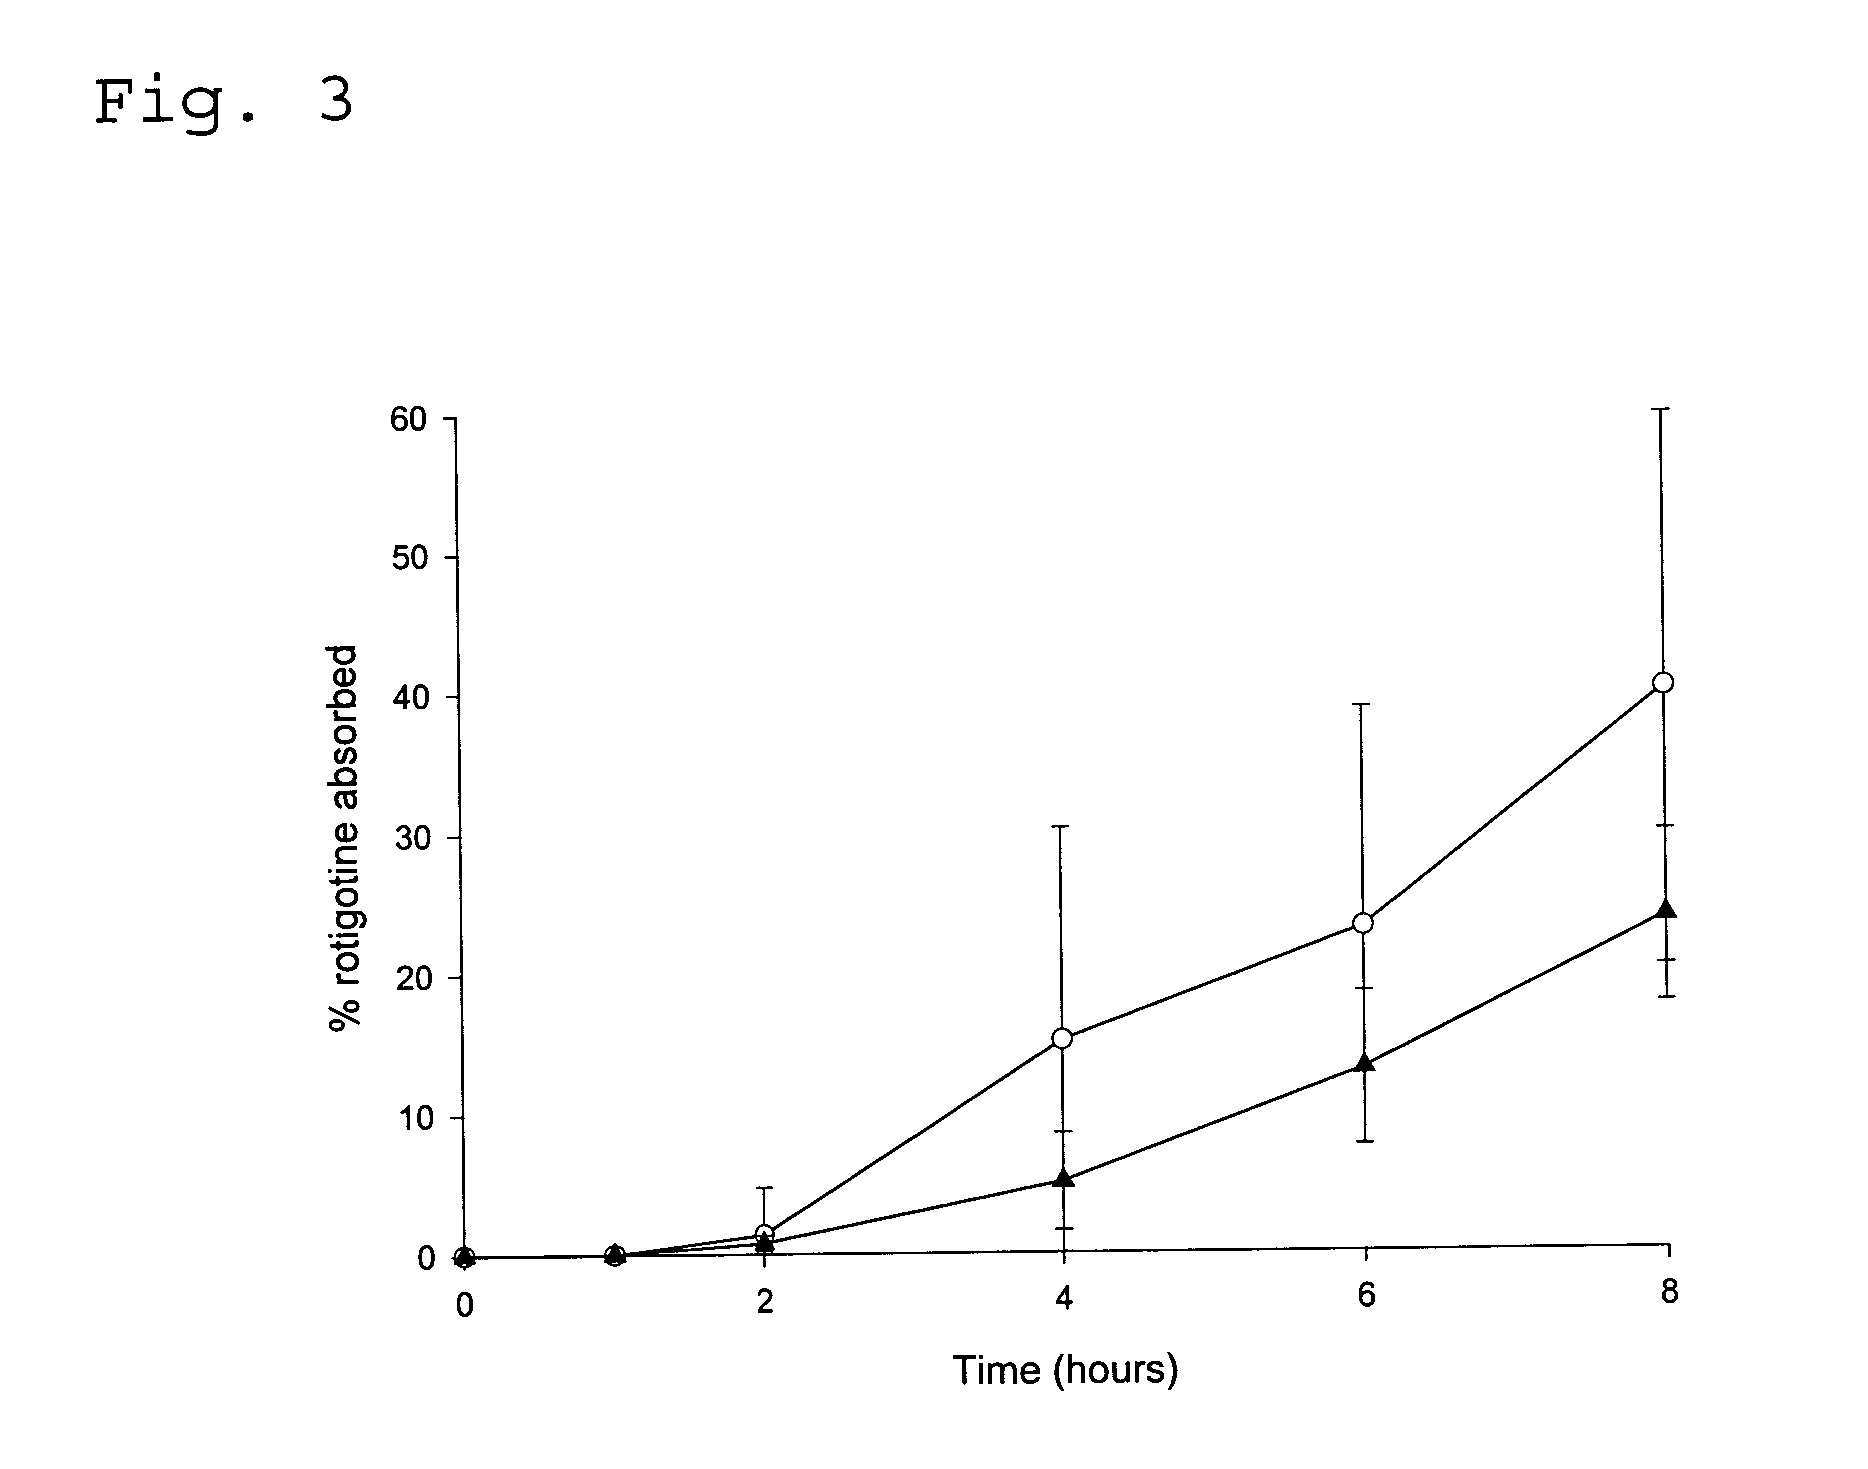 Transdermal delivery system for the administration of rotigotine